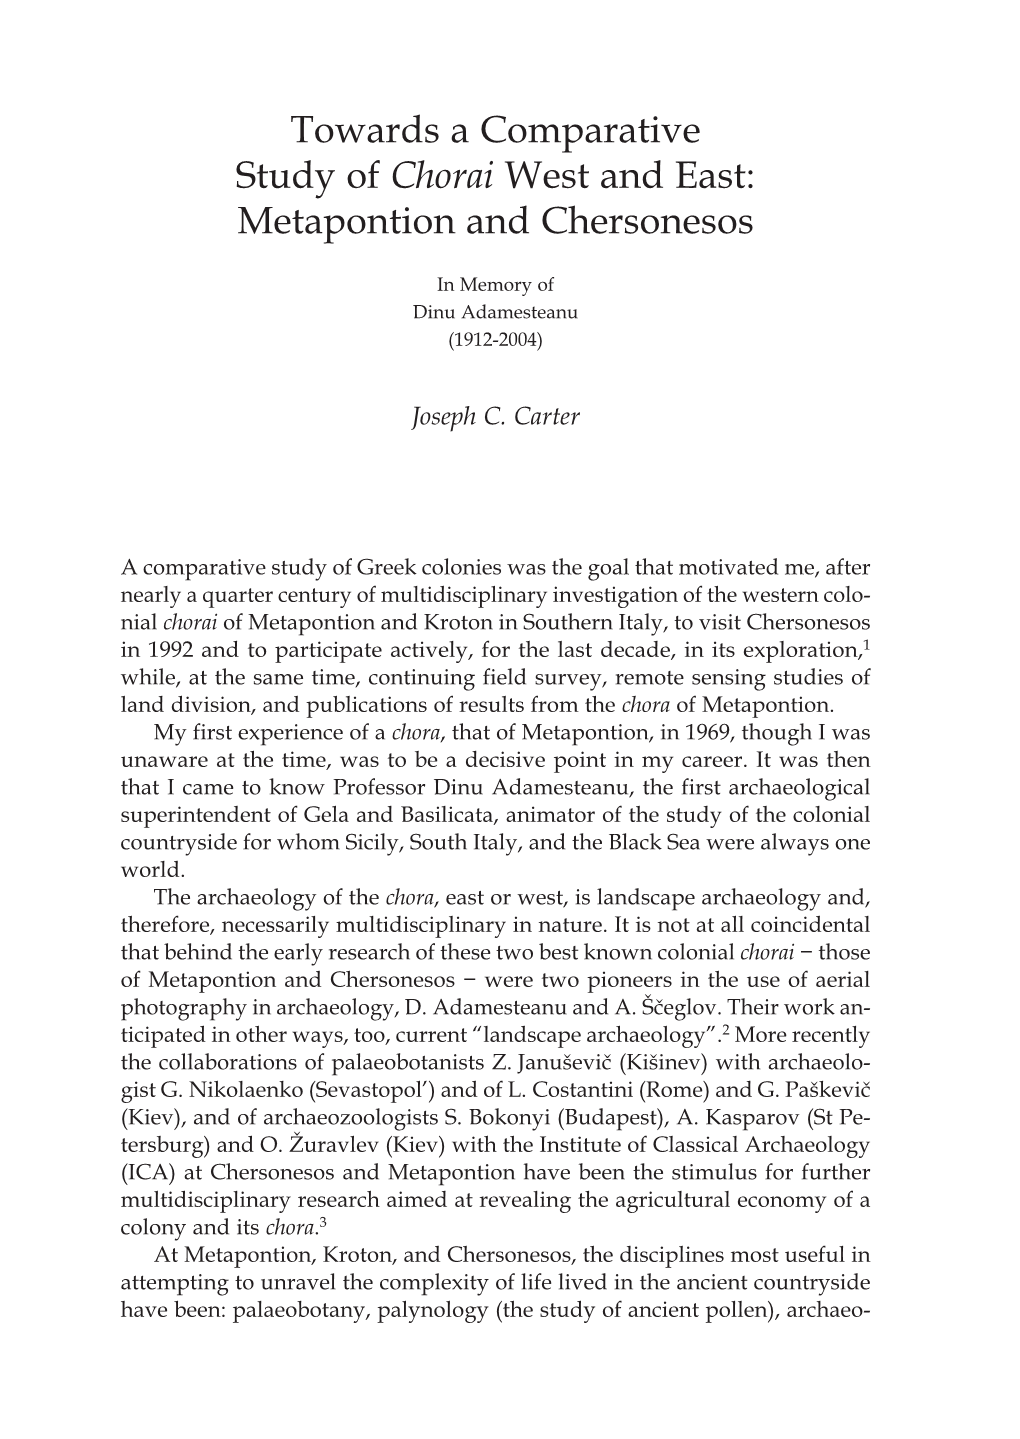 Towards a Comparative Study of Chorai West and East: Metapontion and Chersonesos